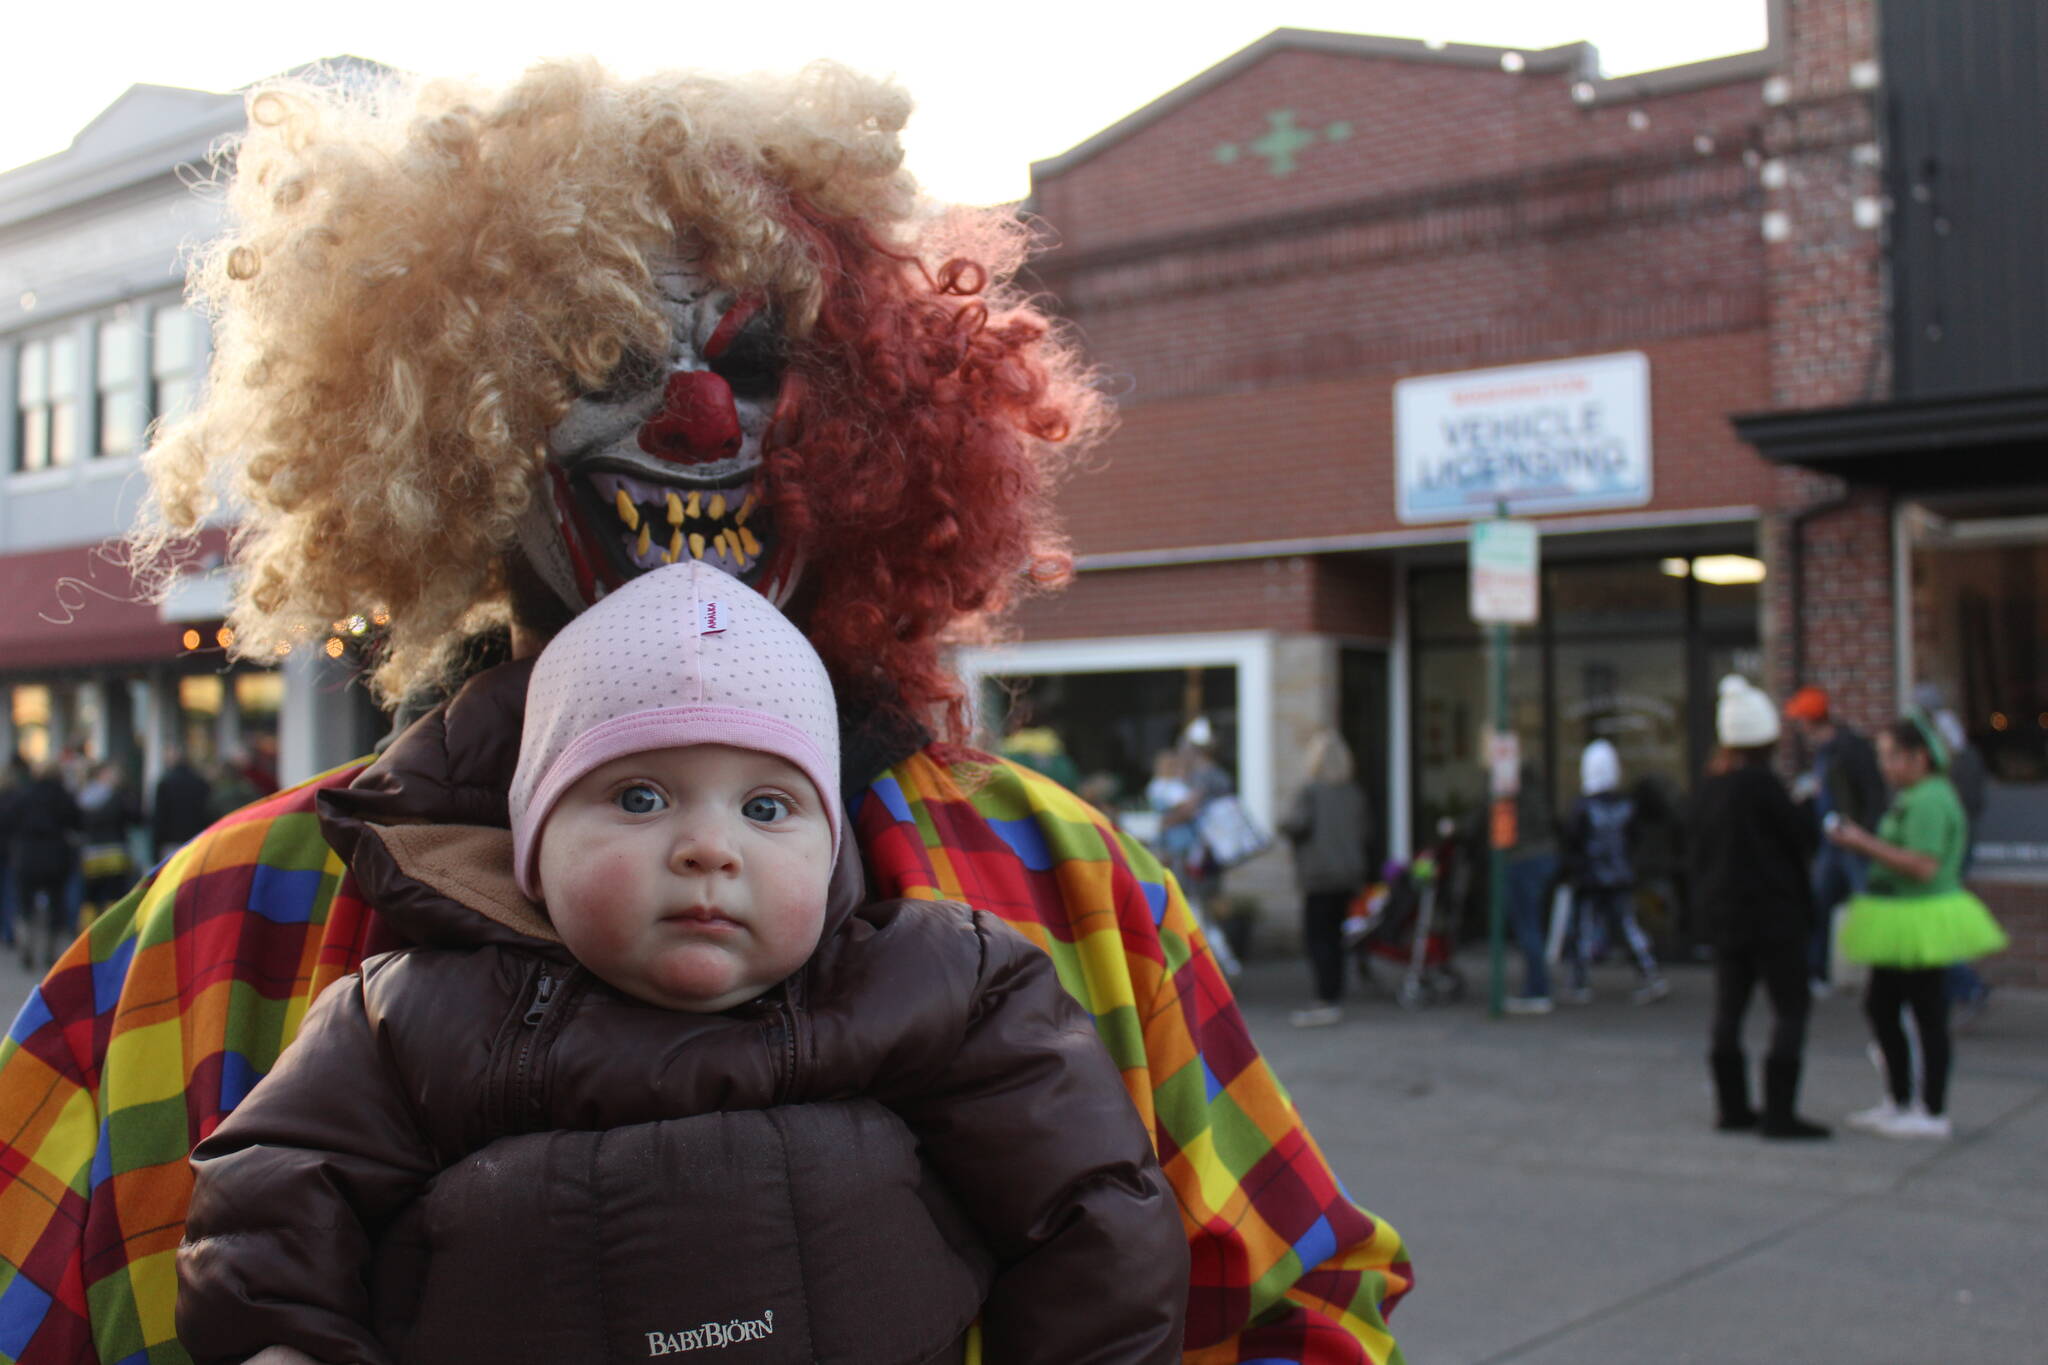 Halloween season is upon us, and Enumclaw plans to close down Cole Street again this year to give families the opportunity to safely trick-or-treat downtown. Photos by Ray Miller-Still